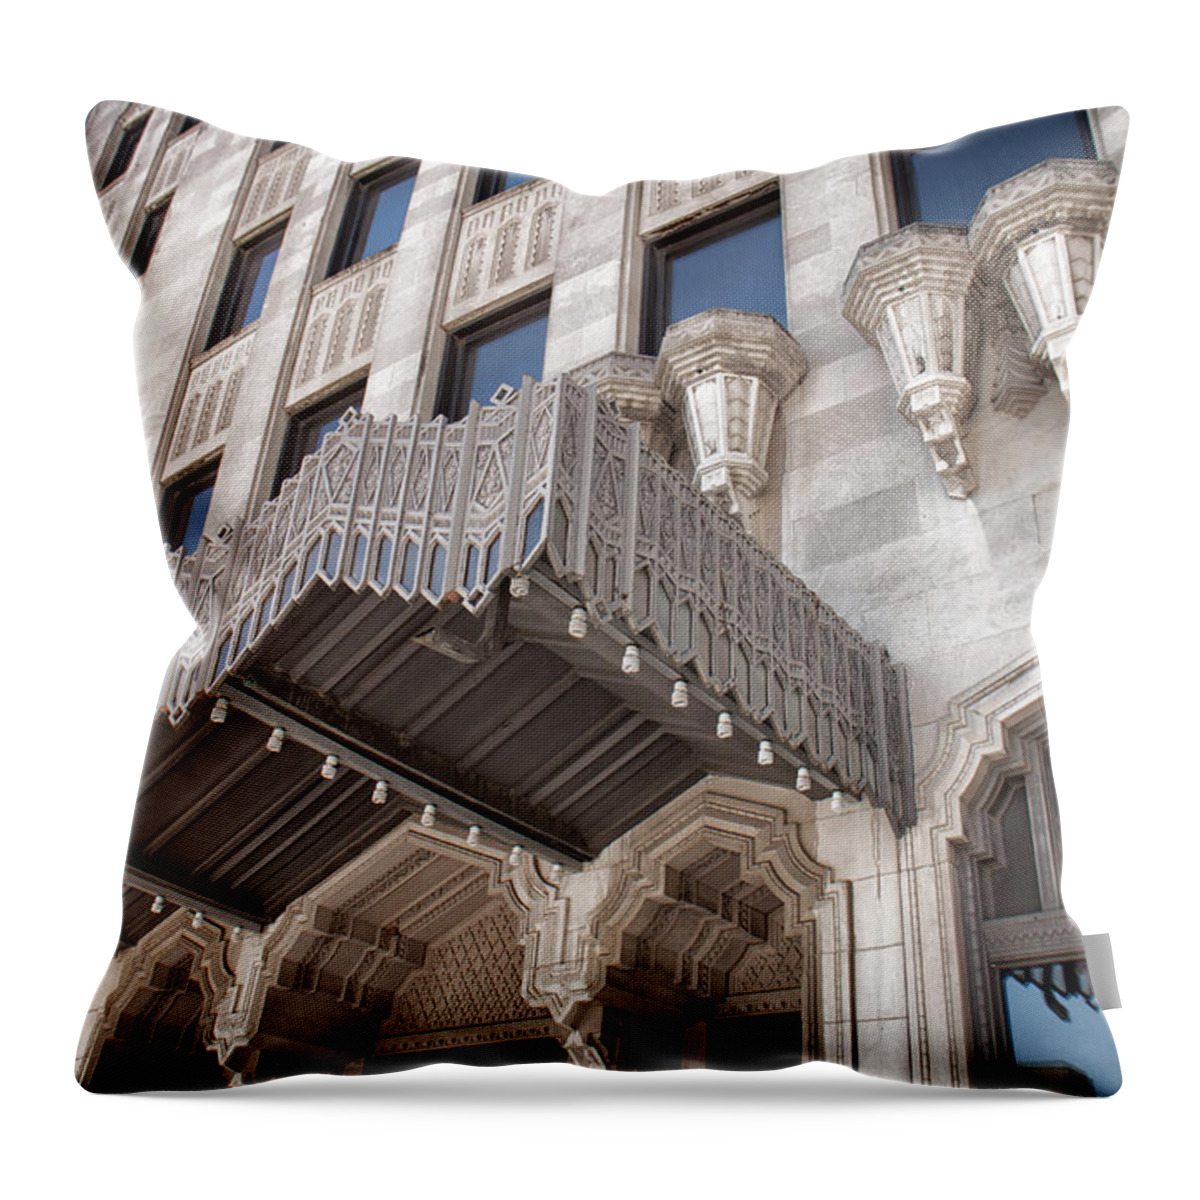 Architecture Throw Pillow featuring the photograph Tulsa Art Deco by Lauri Novak